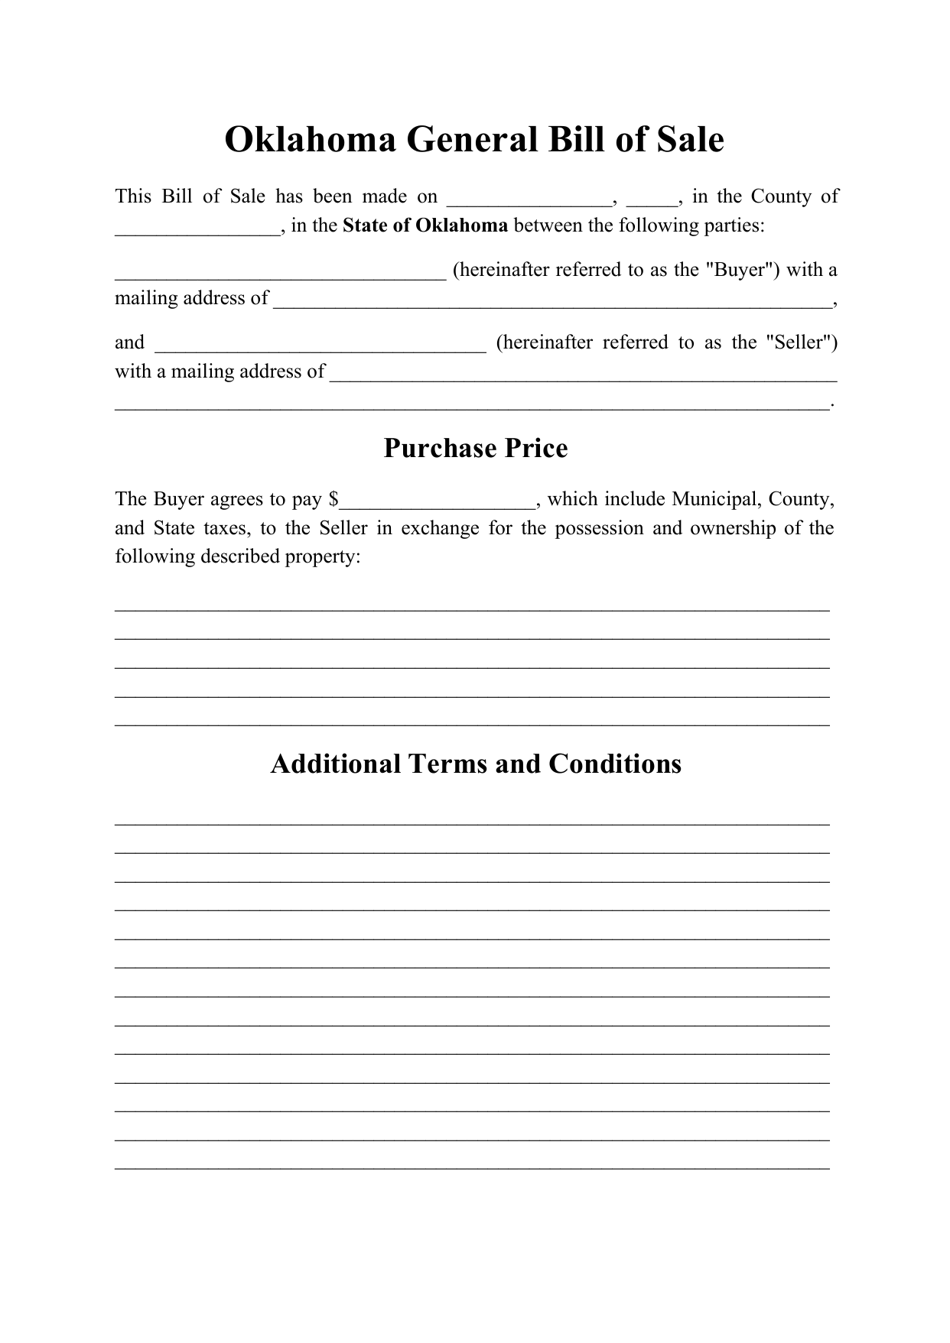 oklahoma-generic-bill-of-sale-form-fill-out-sign-online-and-download